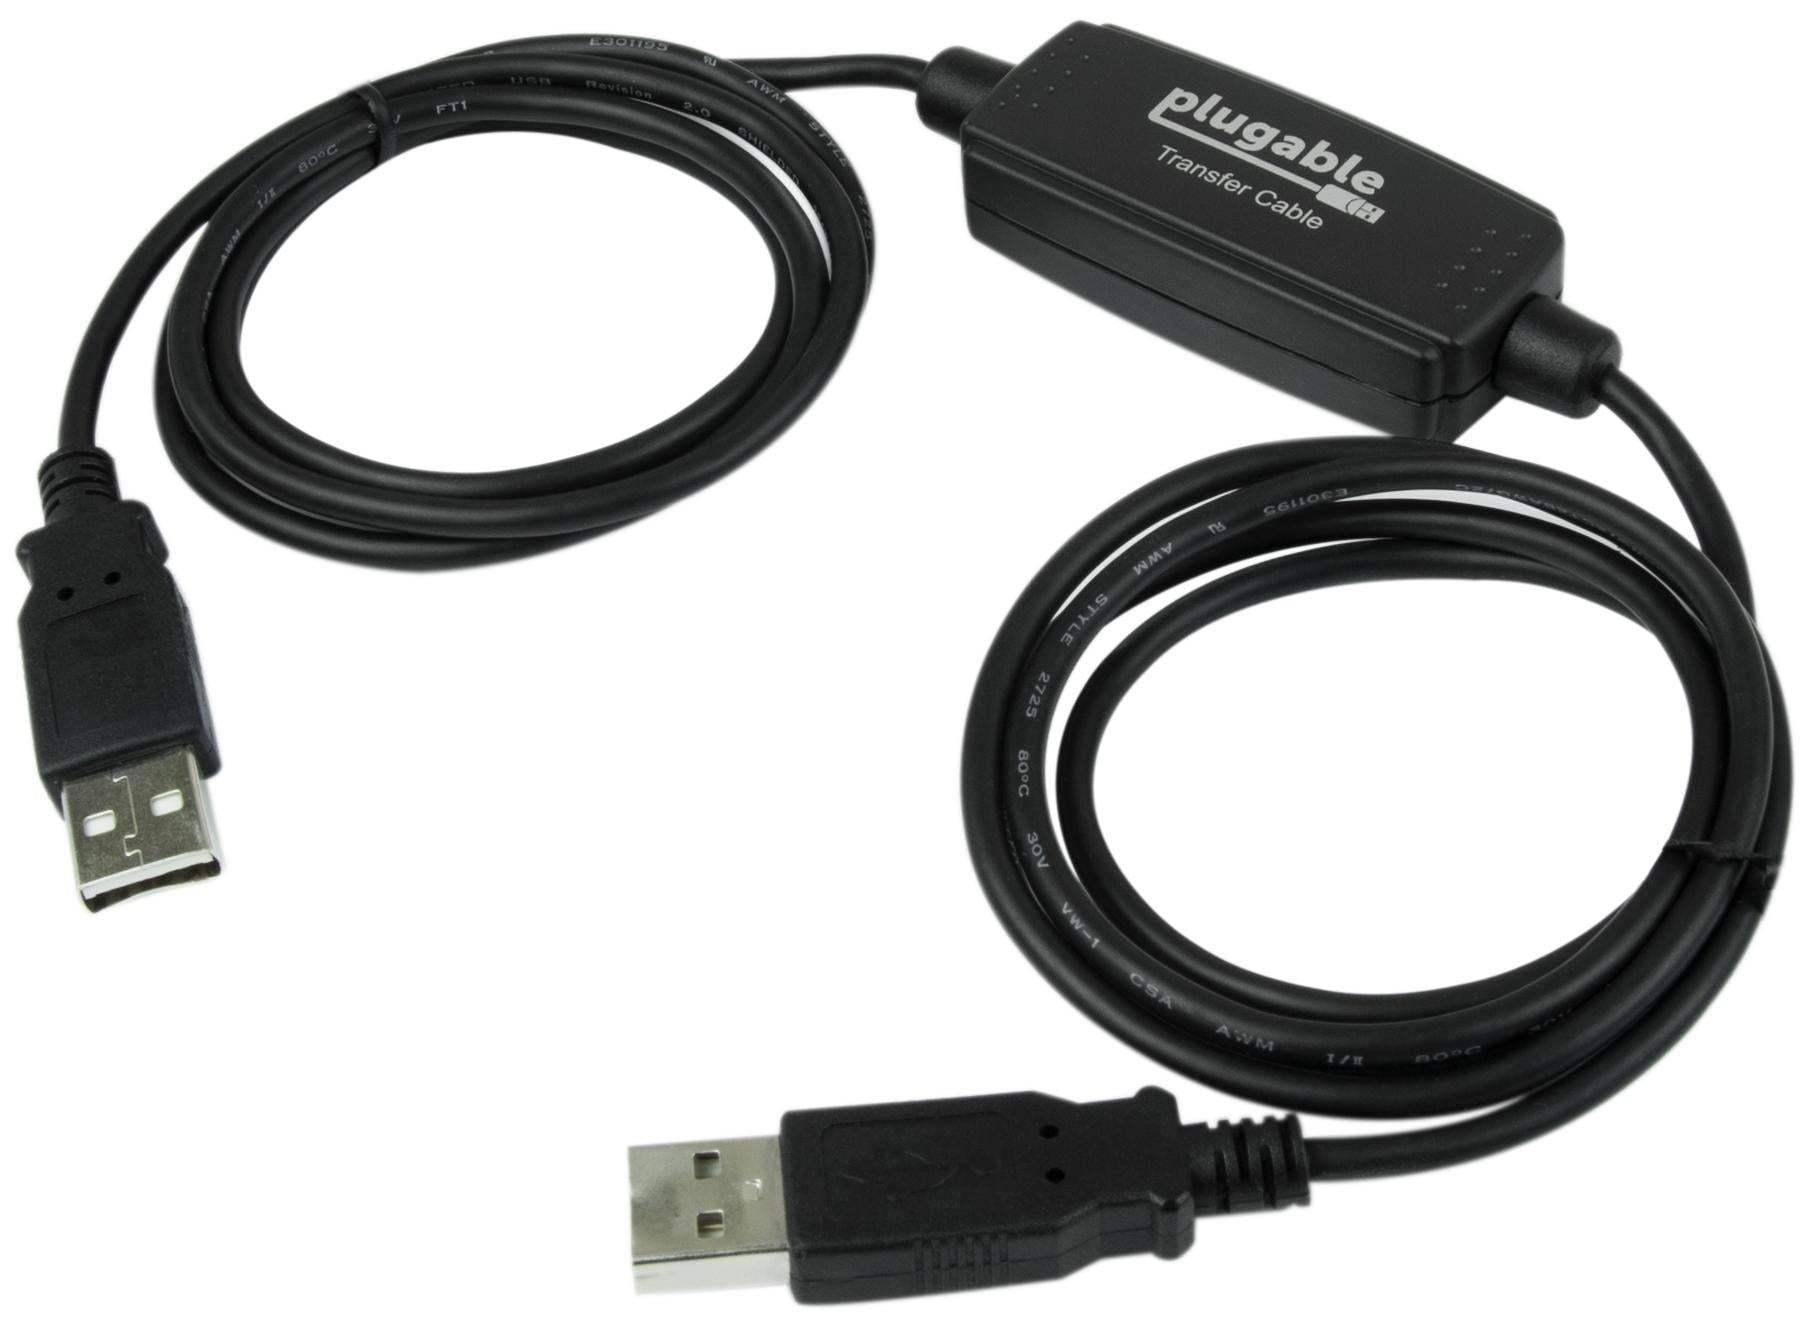 USB-ZERO  USB 2.0 extender for gaming or controllers with zero